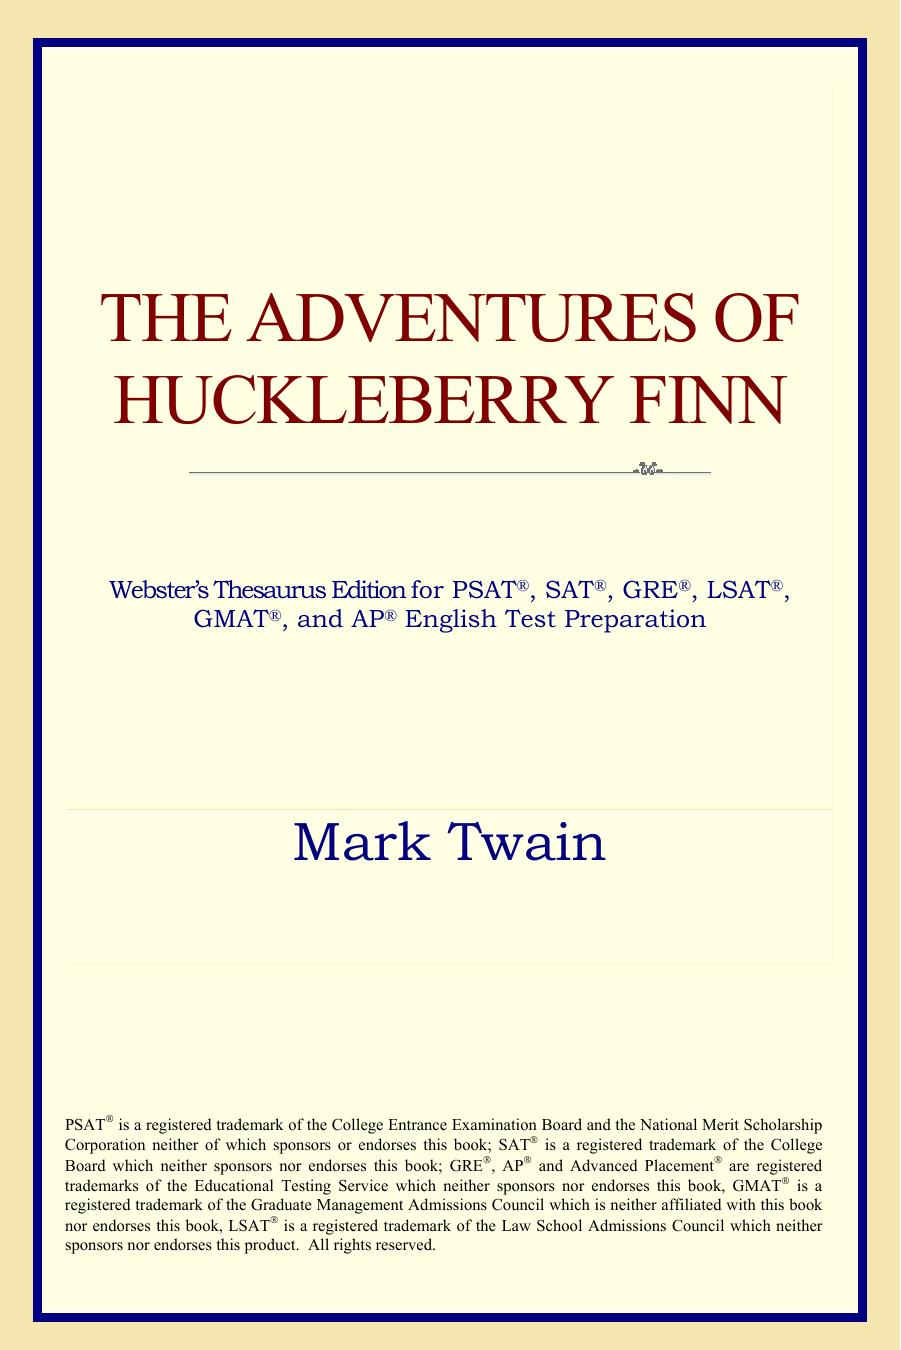 The Adventures of Huckleberry Finn (Websters Thesaurus Edition)